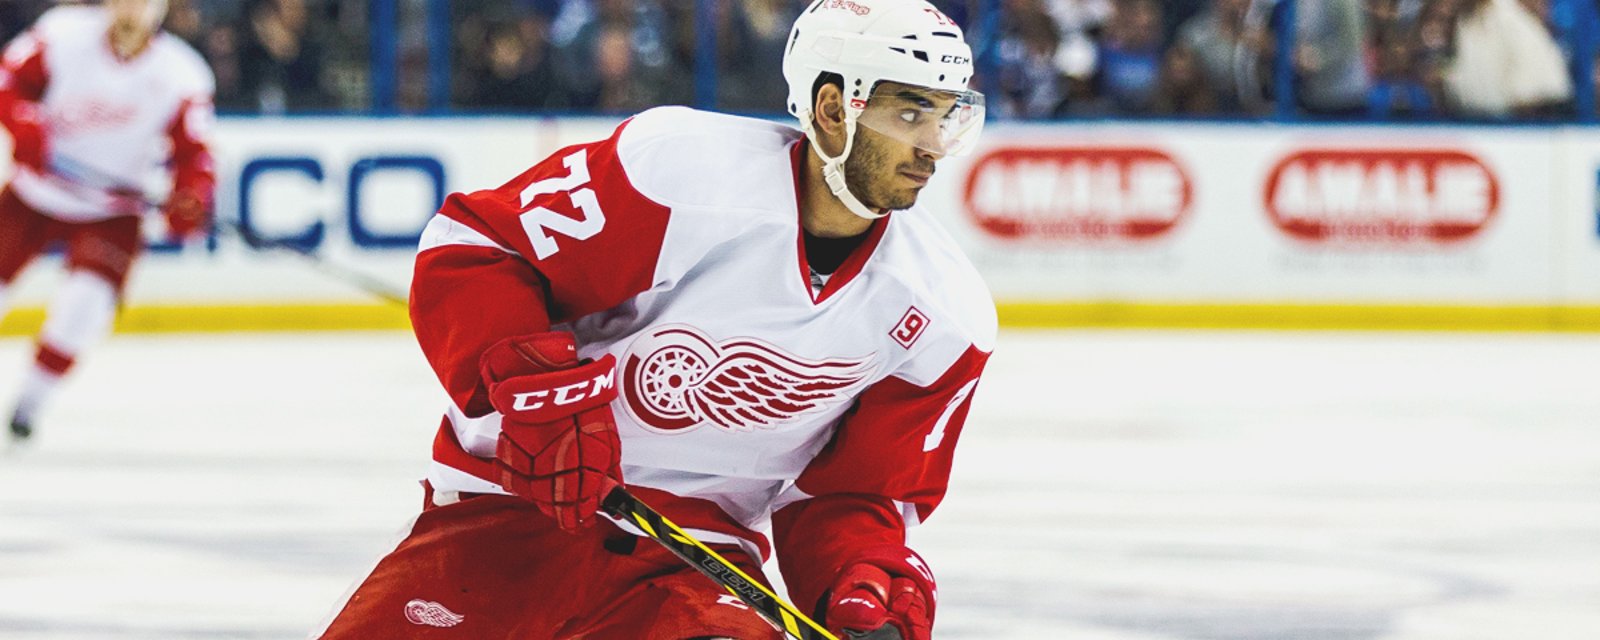 Must see: Athanasiou carries the puck end-to-end.